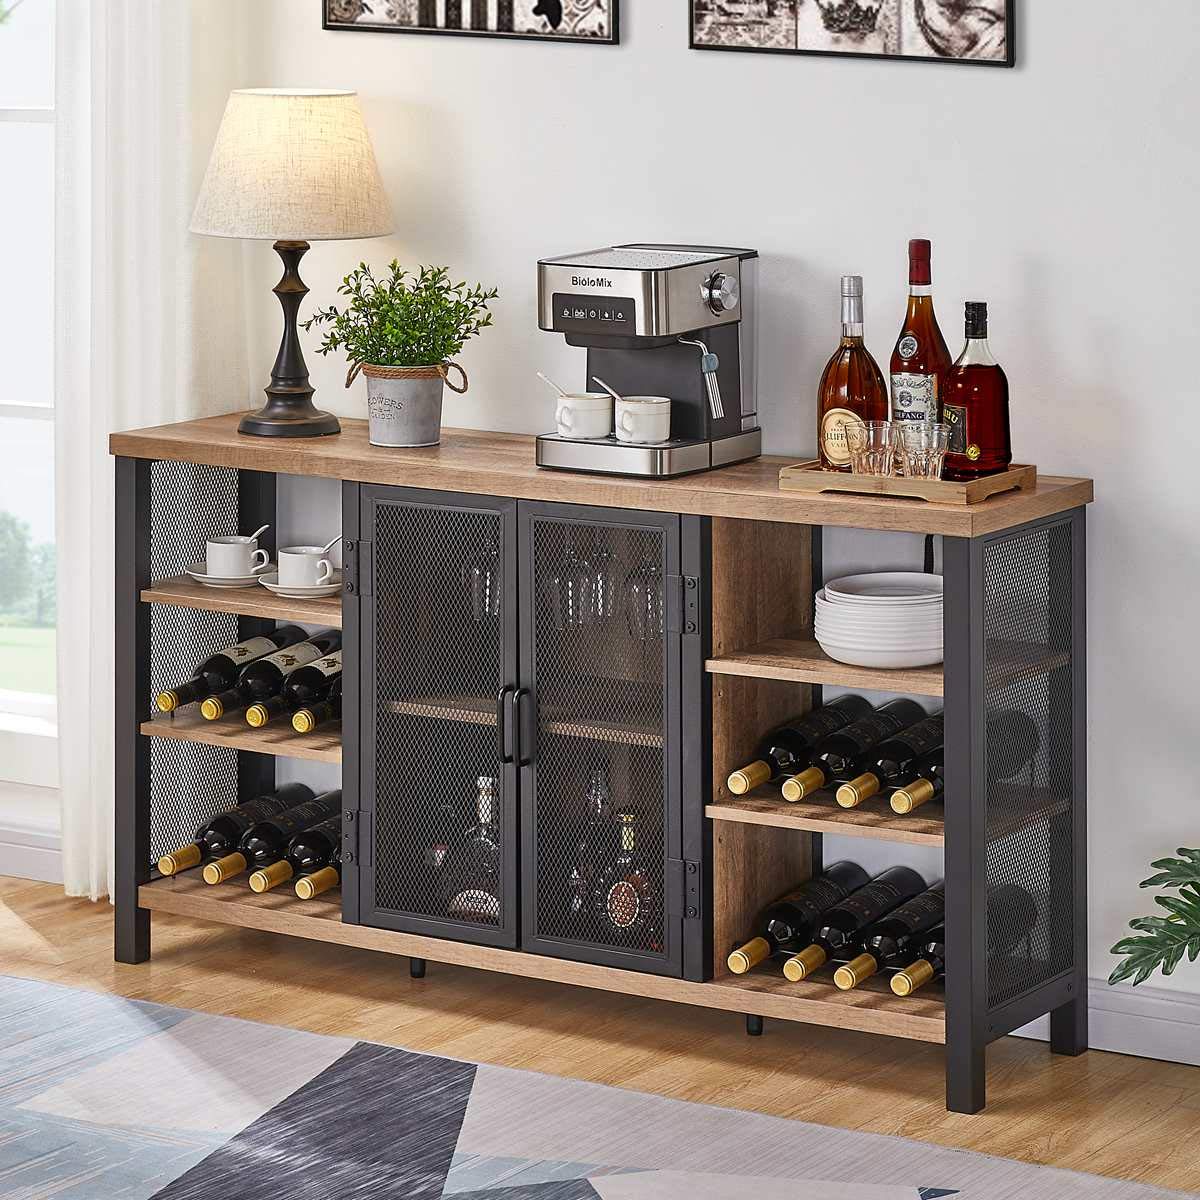 FATORRI Industrial Wine Bar cabinet for Liquor and glasses, Farmhouse Wood coffee Bar cabinet with Wine Rack, Metal Sideboard an